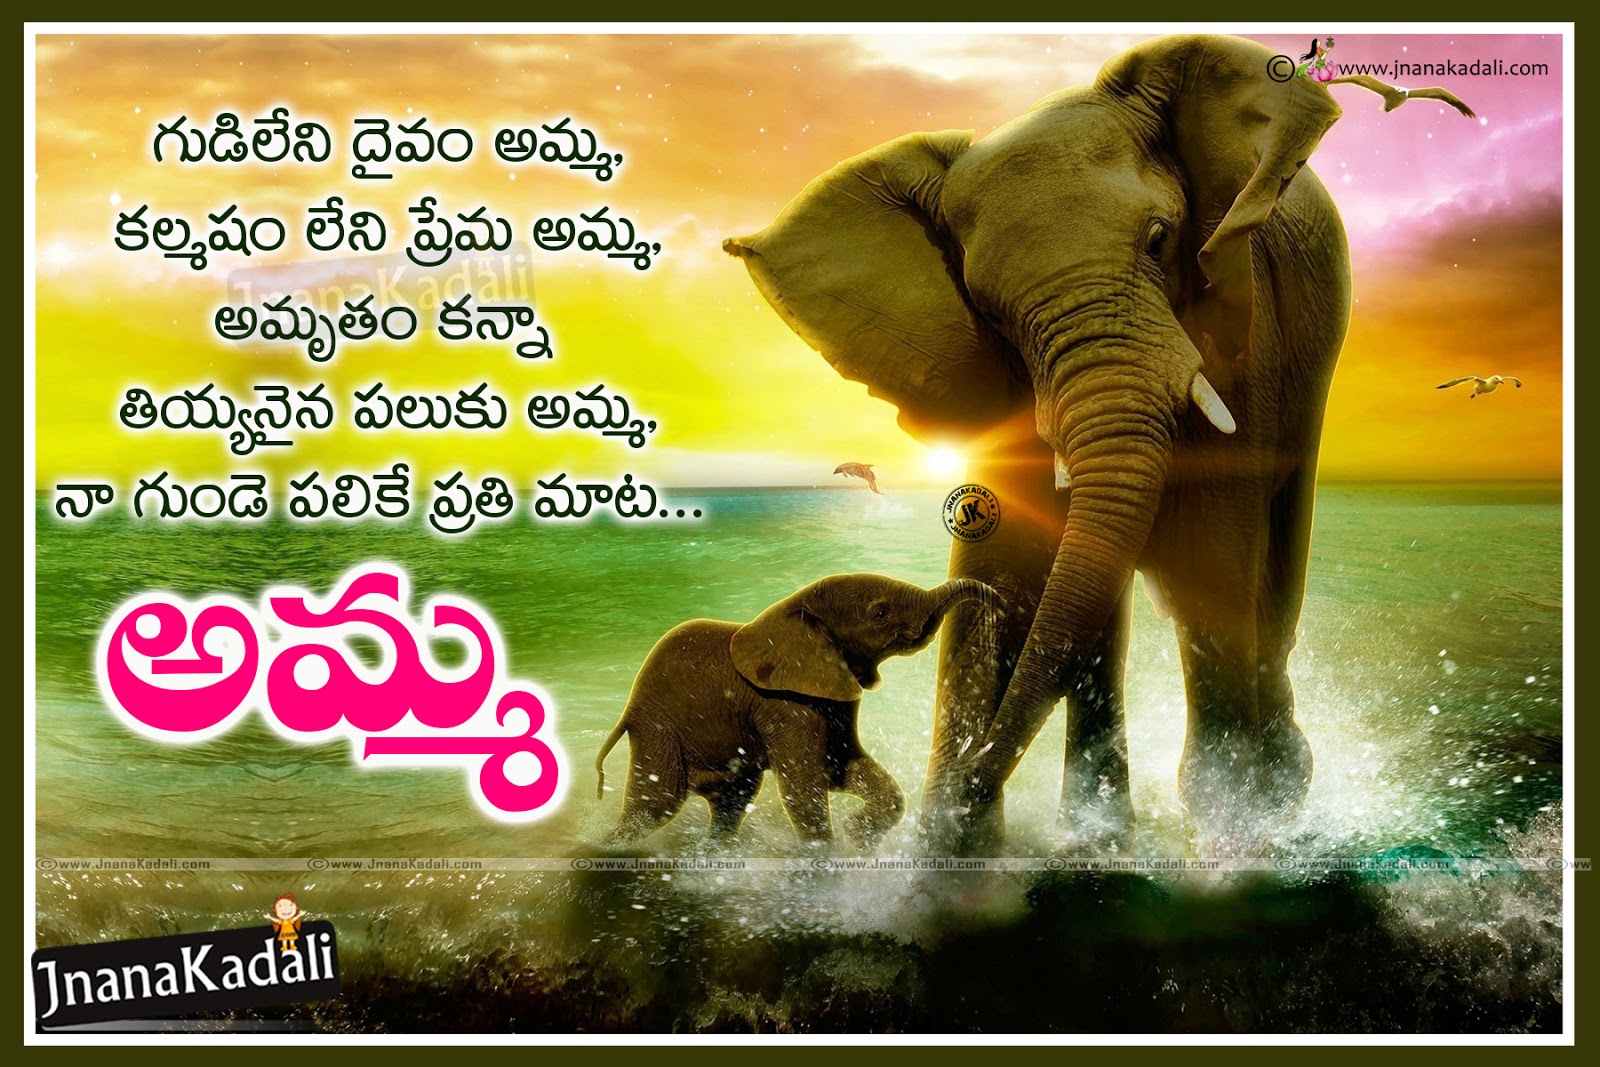 Mother Greatness Quotes hd wallpapers in Telugu | JNANA  |Telugu  Quotes|English quotes|Hindi quotes|Tamil quotes|Dharmasandehalu|